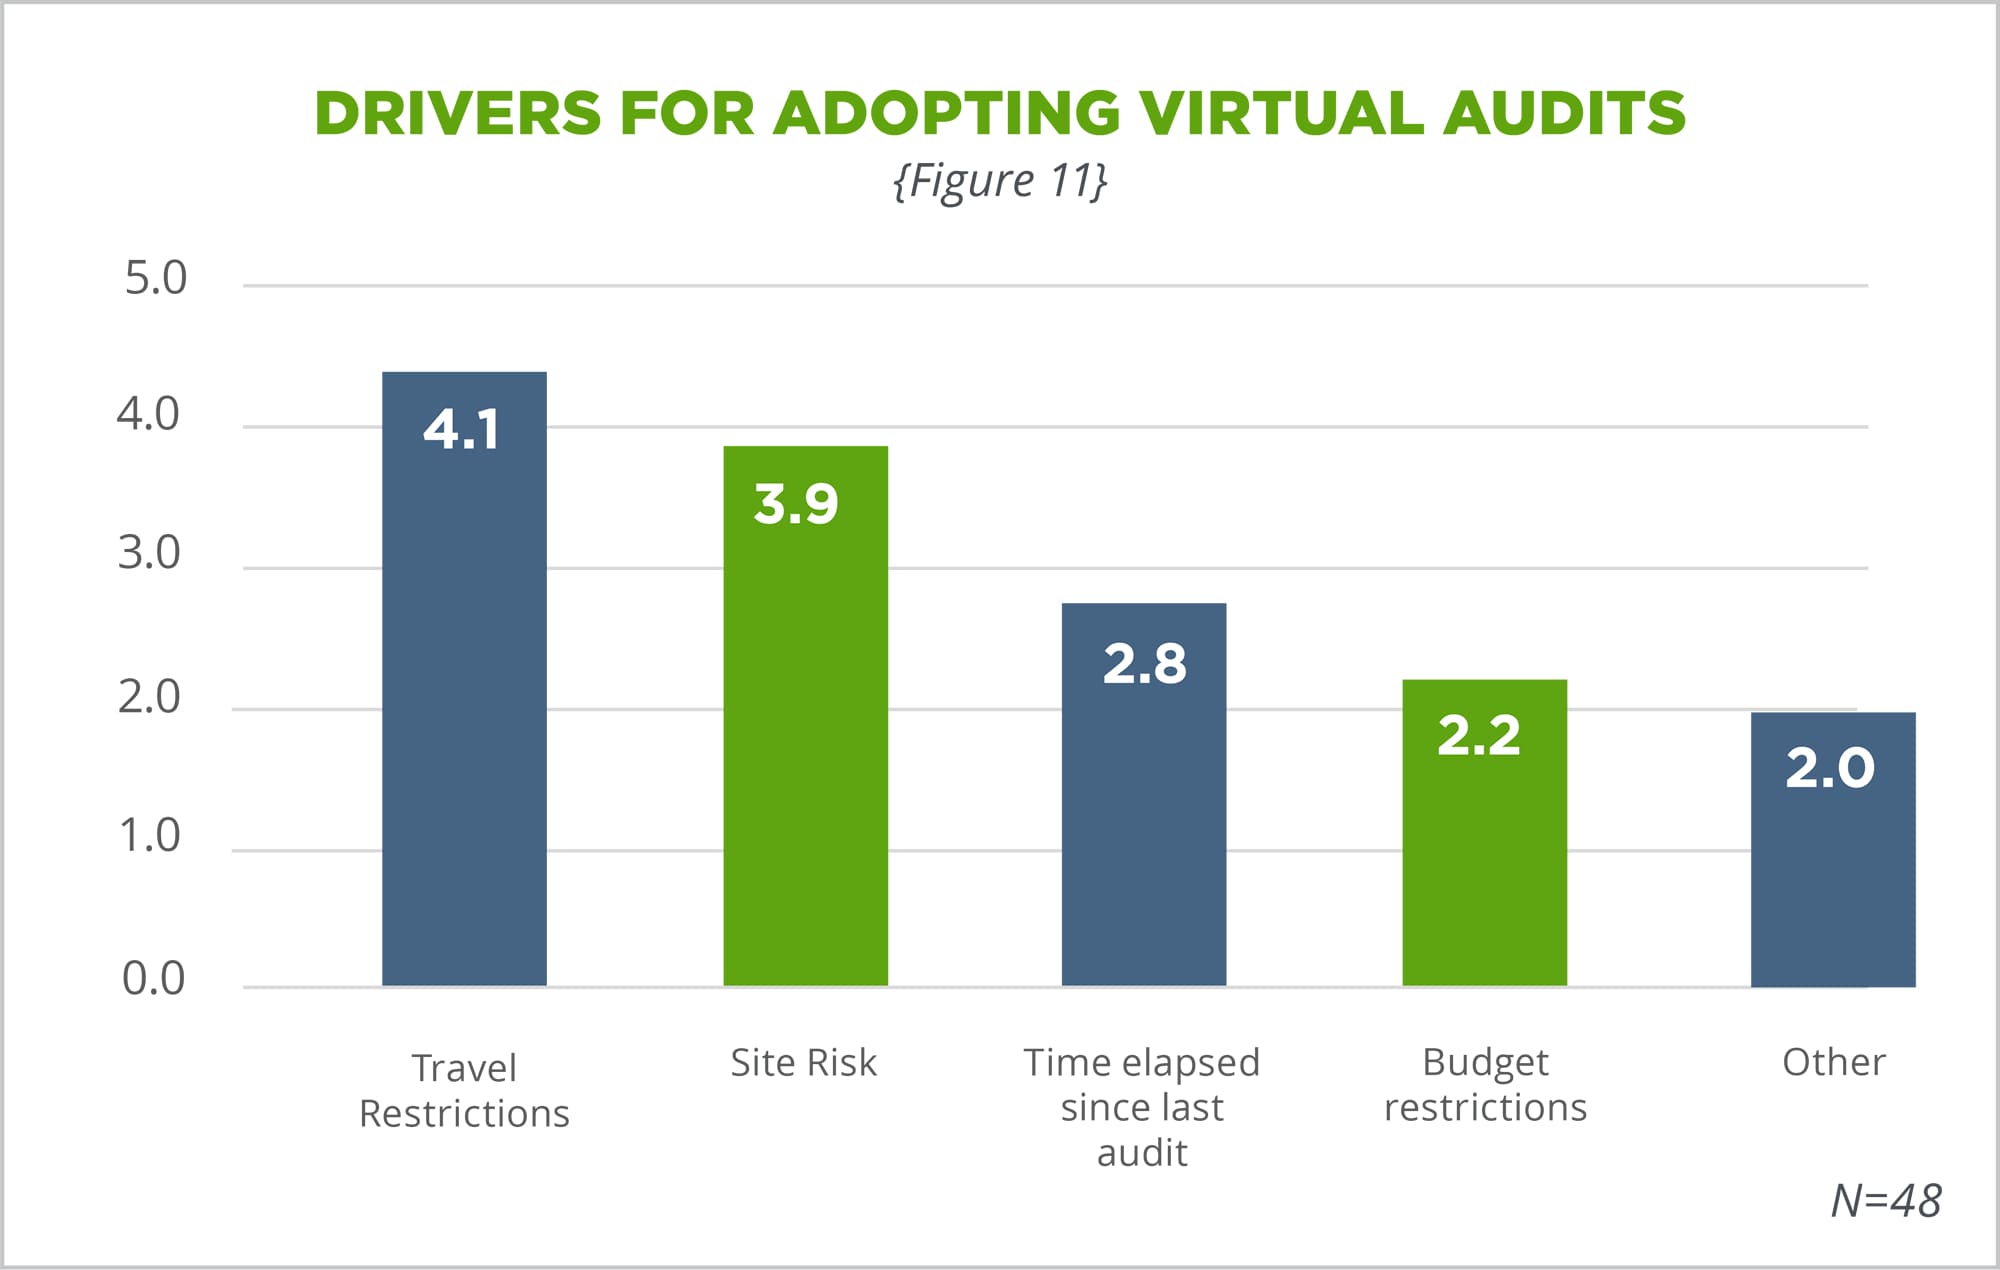 naem-2021-research-the-emergence-of-virtual-auditing-drivers-for-adopting-chart-500x4-min